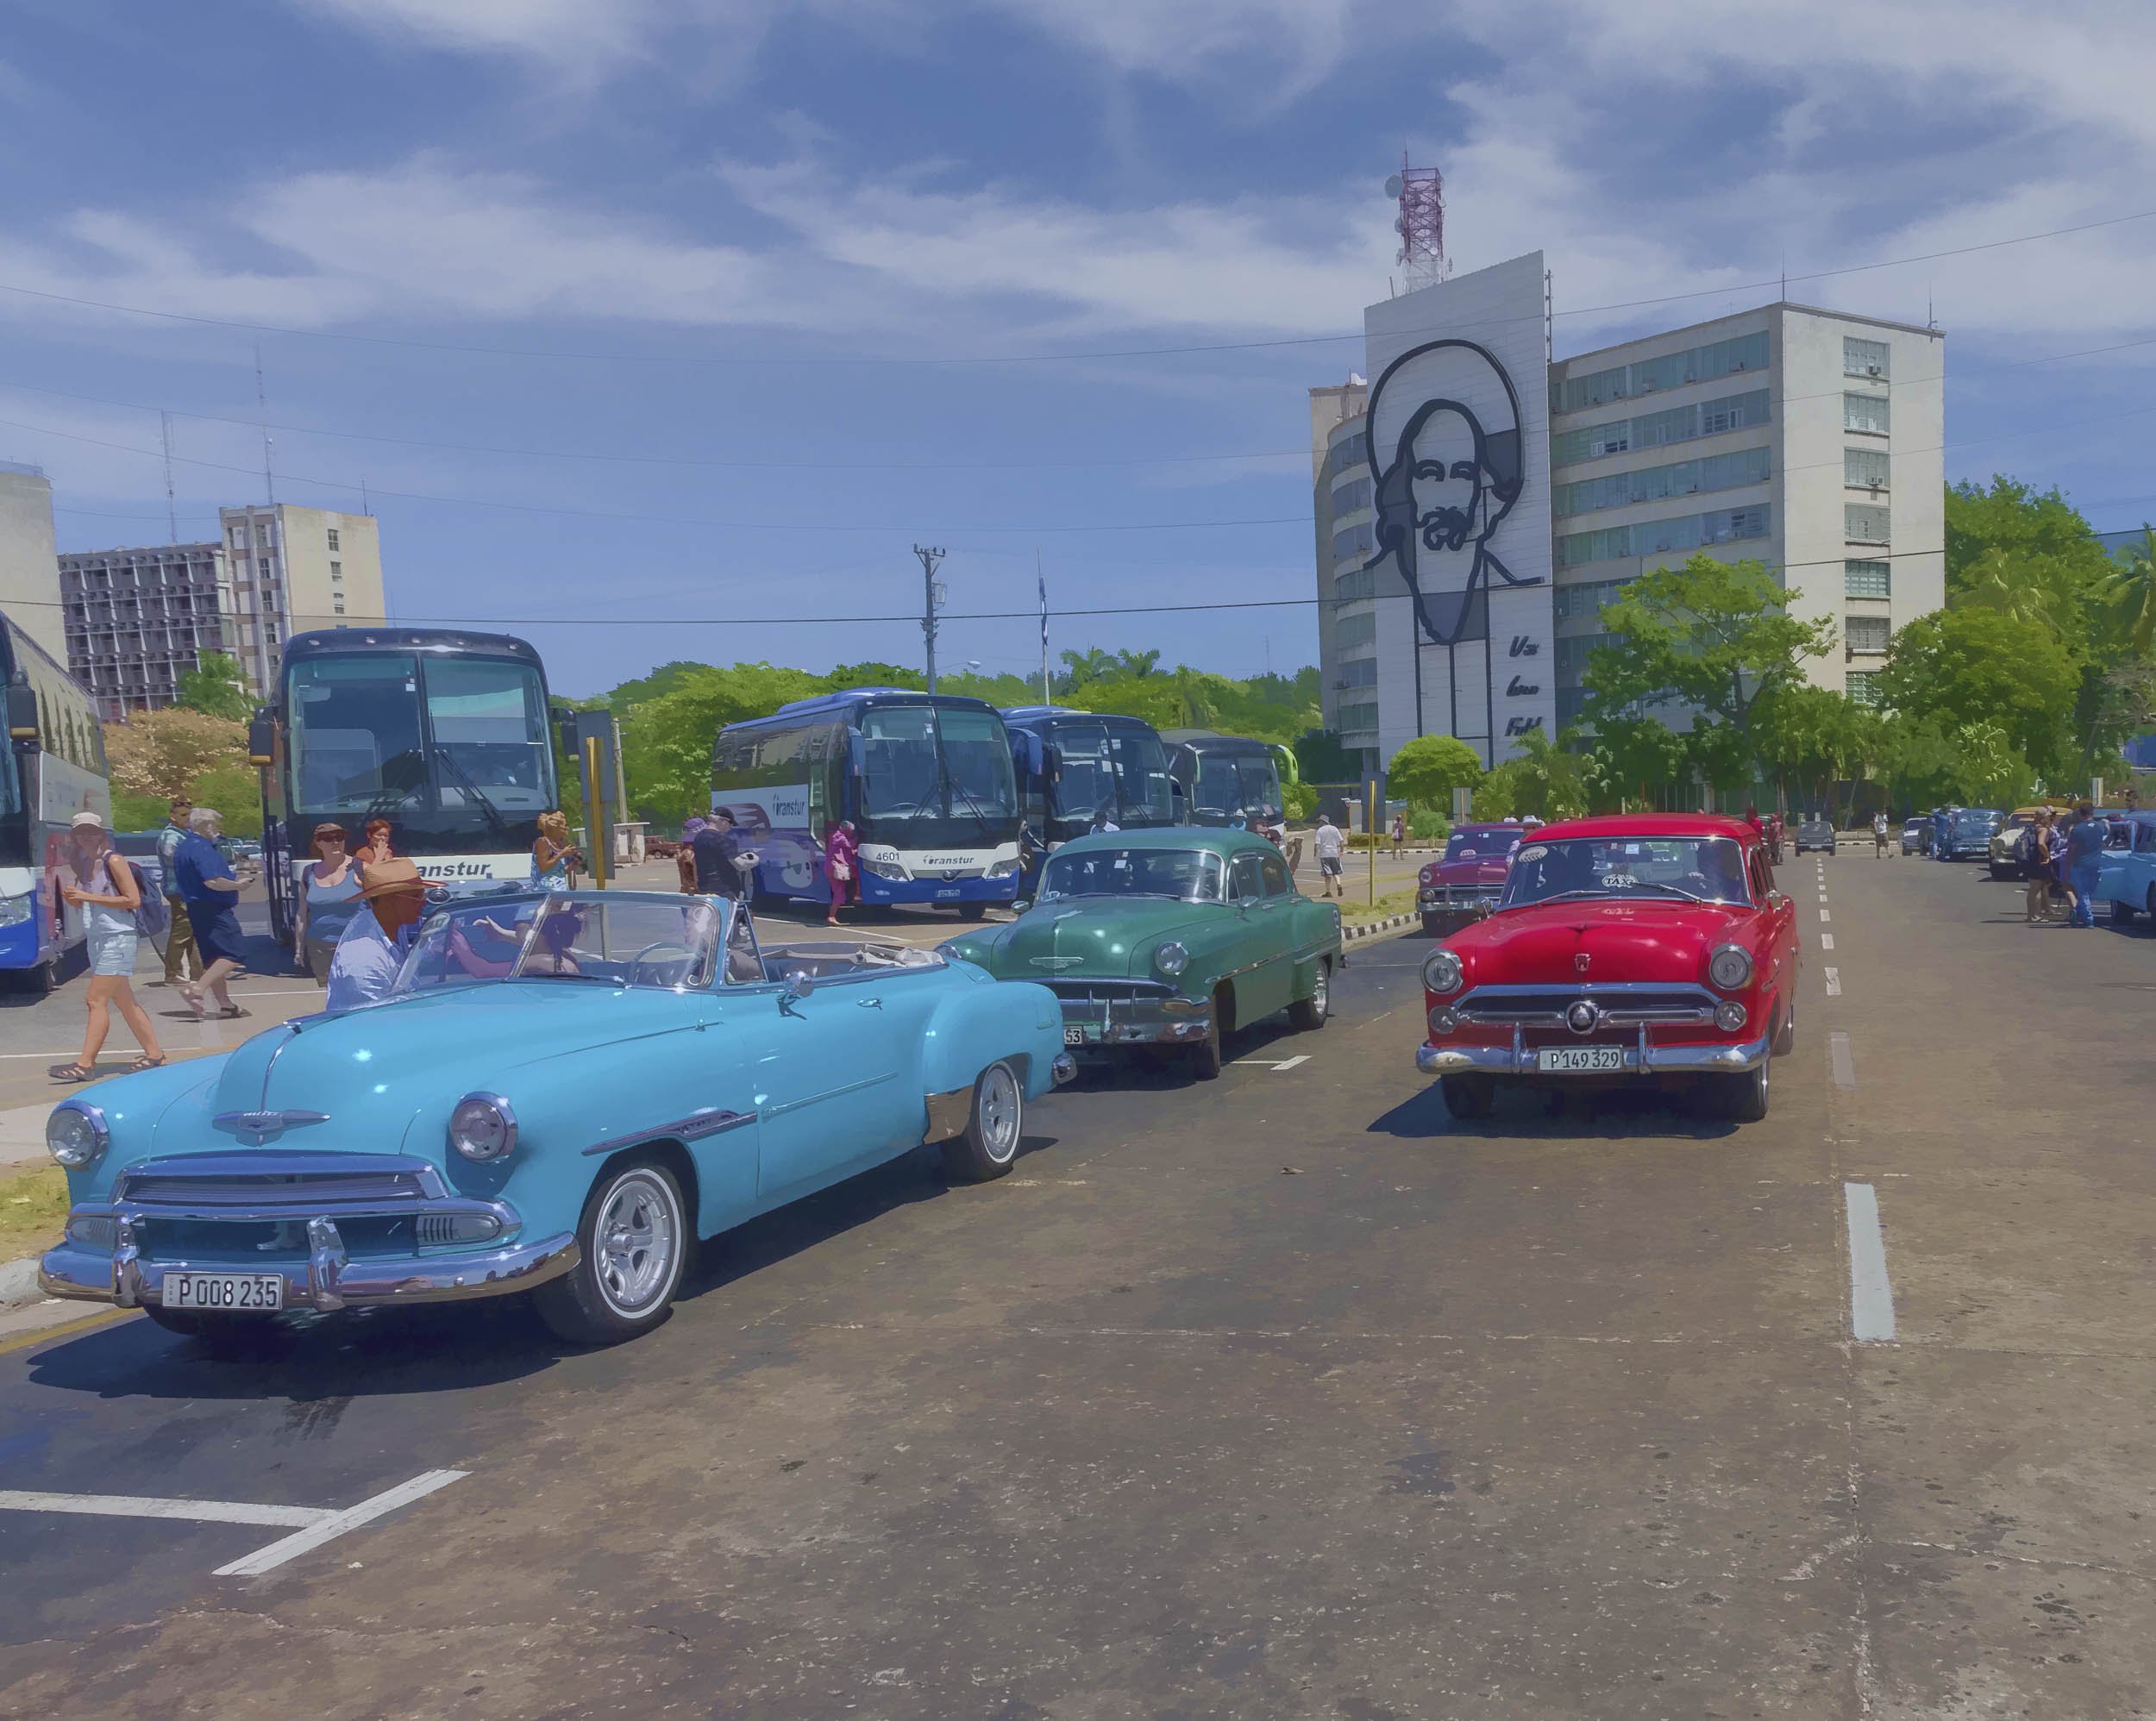 Tour Buses and Taxis, Revolution Plaza, Havana